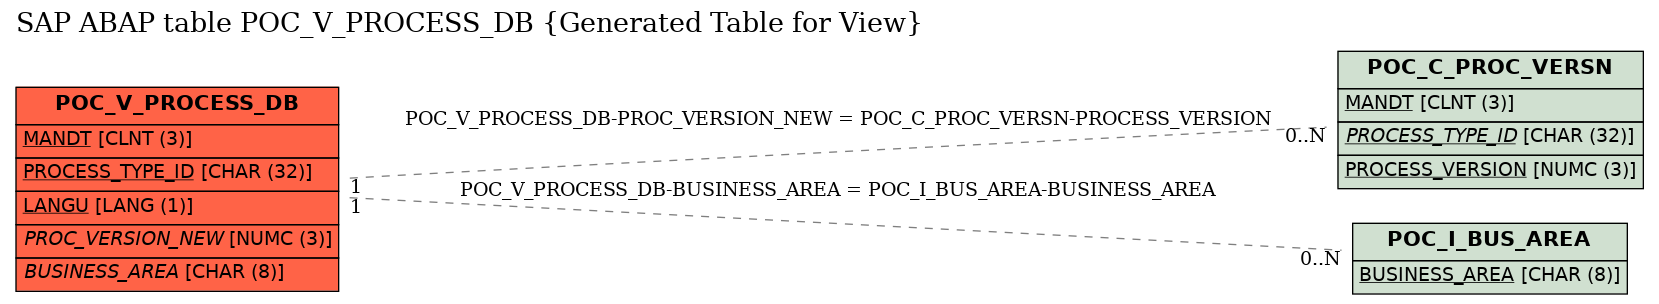 E-R Diagram for table POC_V_PROCESS_DB (Generated Table for View)